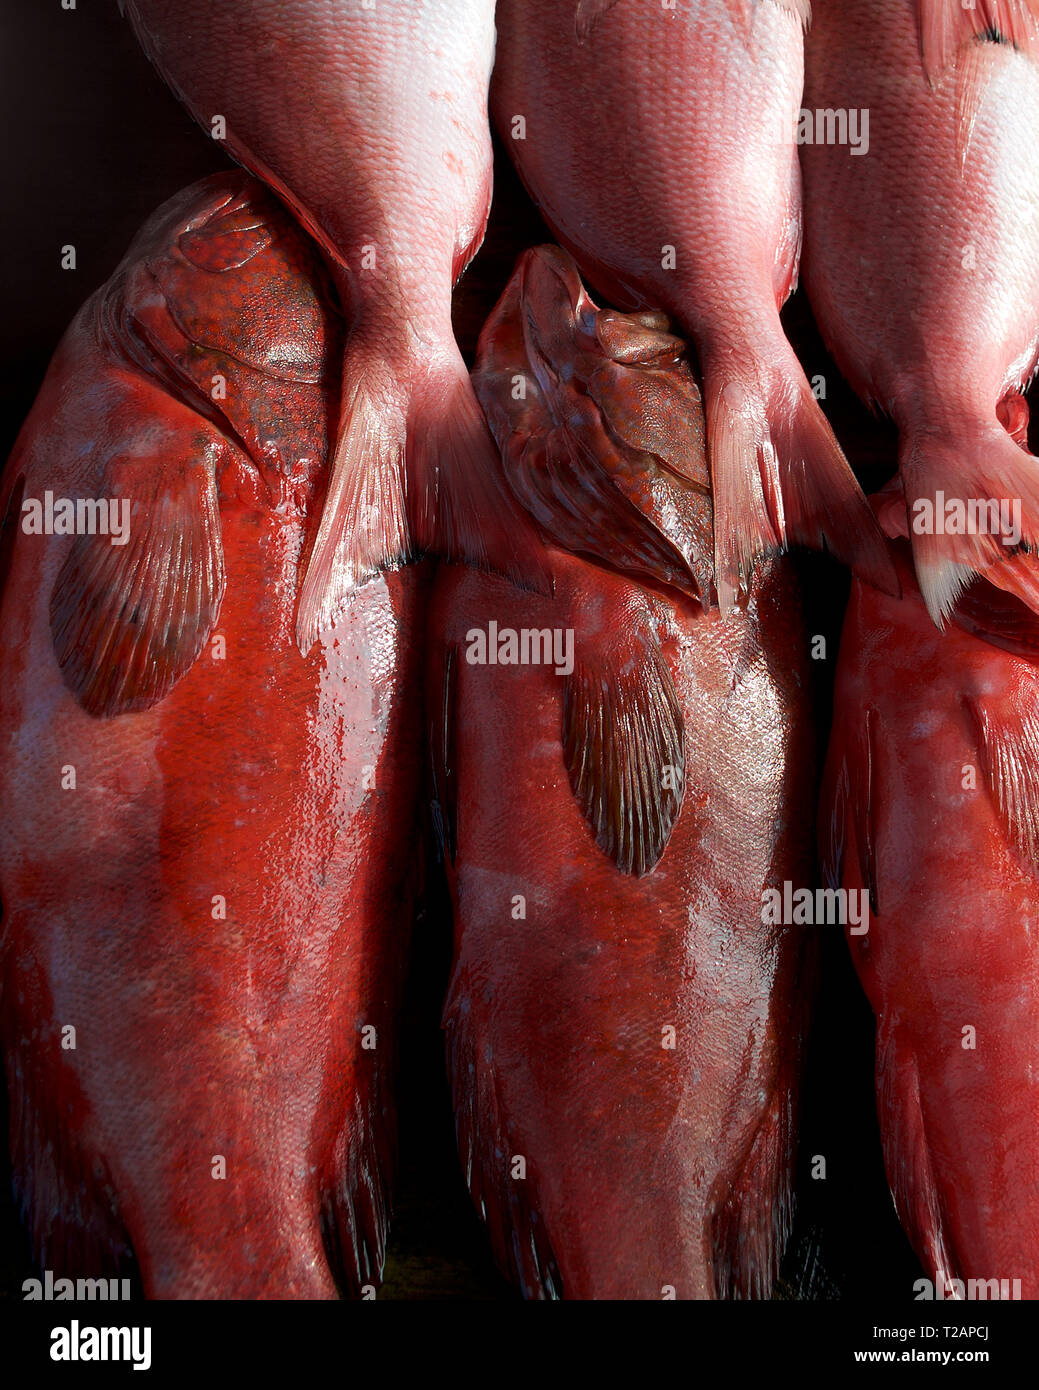 Coral trout (Plectropomus leopardus and P. laevis), or Queen snapper. Shining red fish close up. Fish background in dark colors. Vertical photo. Stock Photo